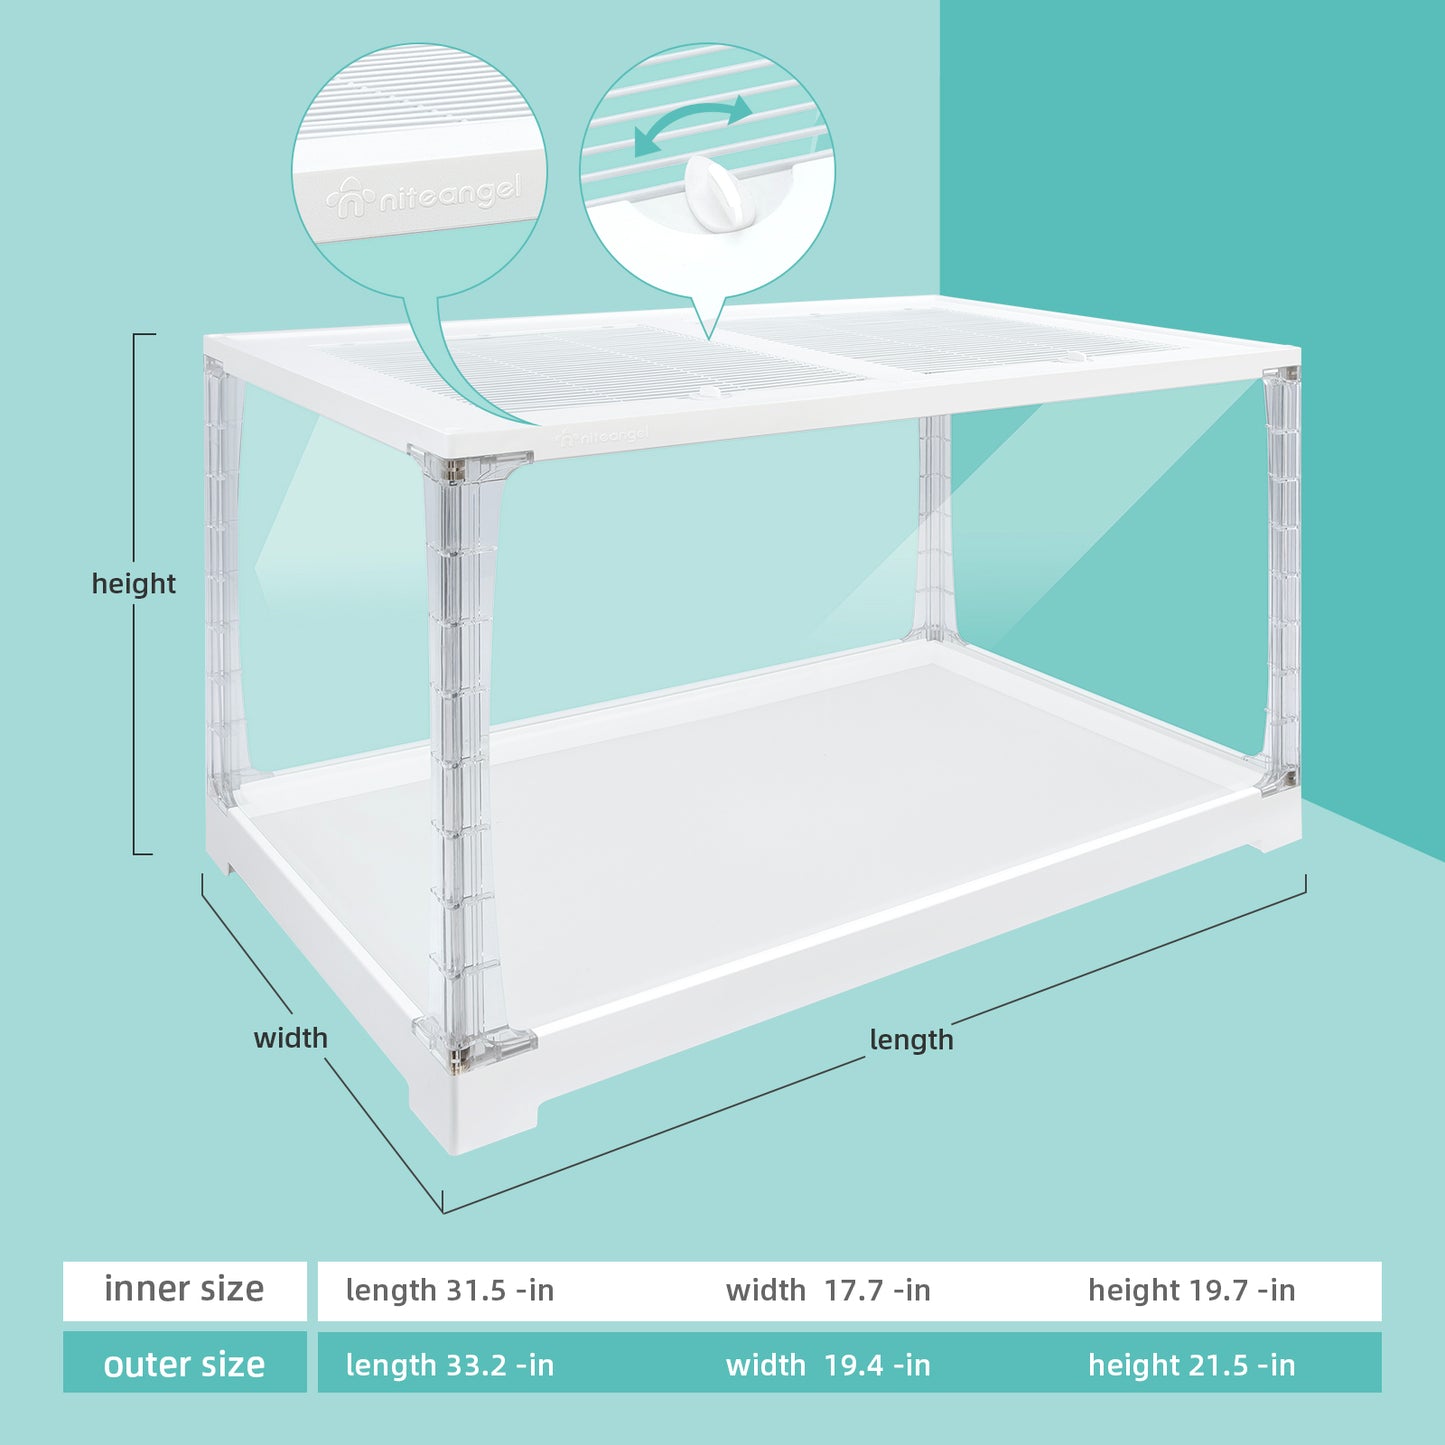 Niteangel Stacker Series Hamster Cage - Stackable & Large Glass Enclosure for Hamster Gerbils Mice Lemming Degus or Other Small-Sized Pets